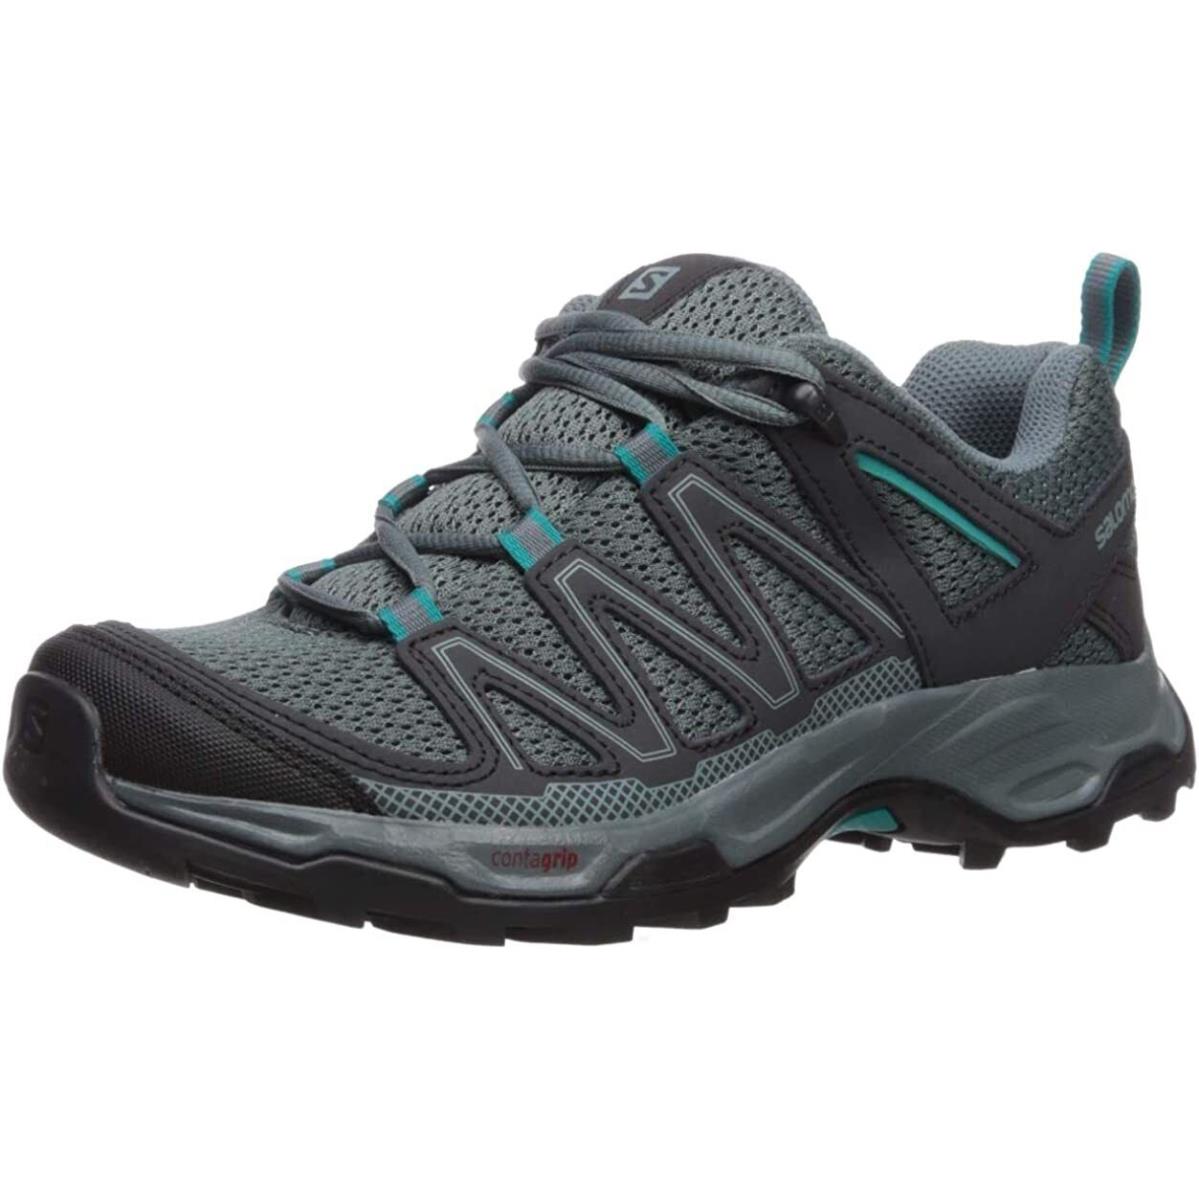 Salomon Women`s Pathfinder Stormy Weather Hiking Shoes Size 5 Teal Black Gray